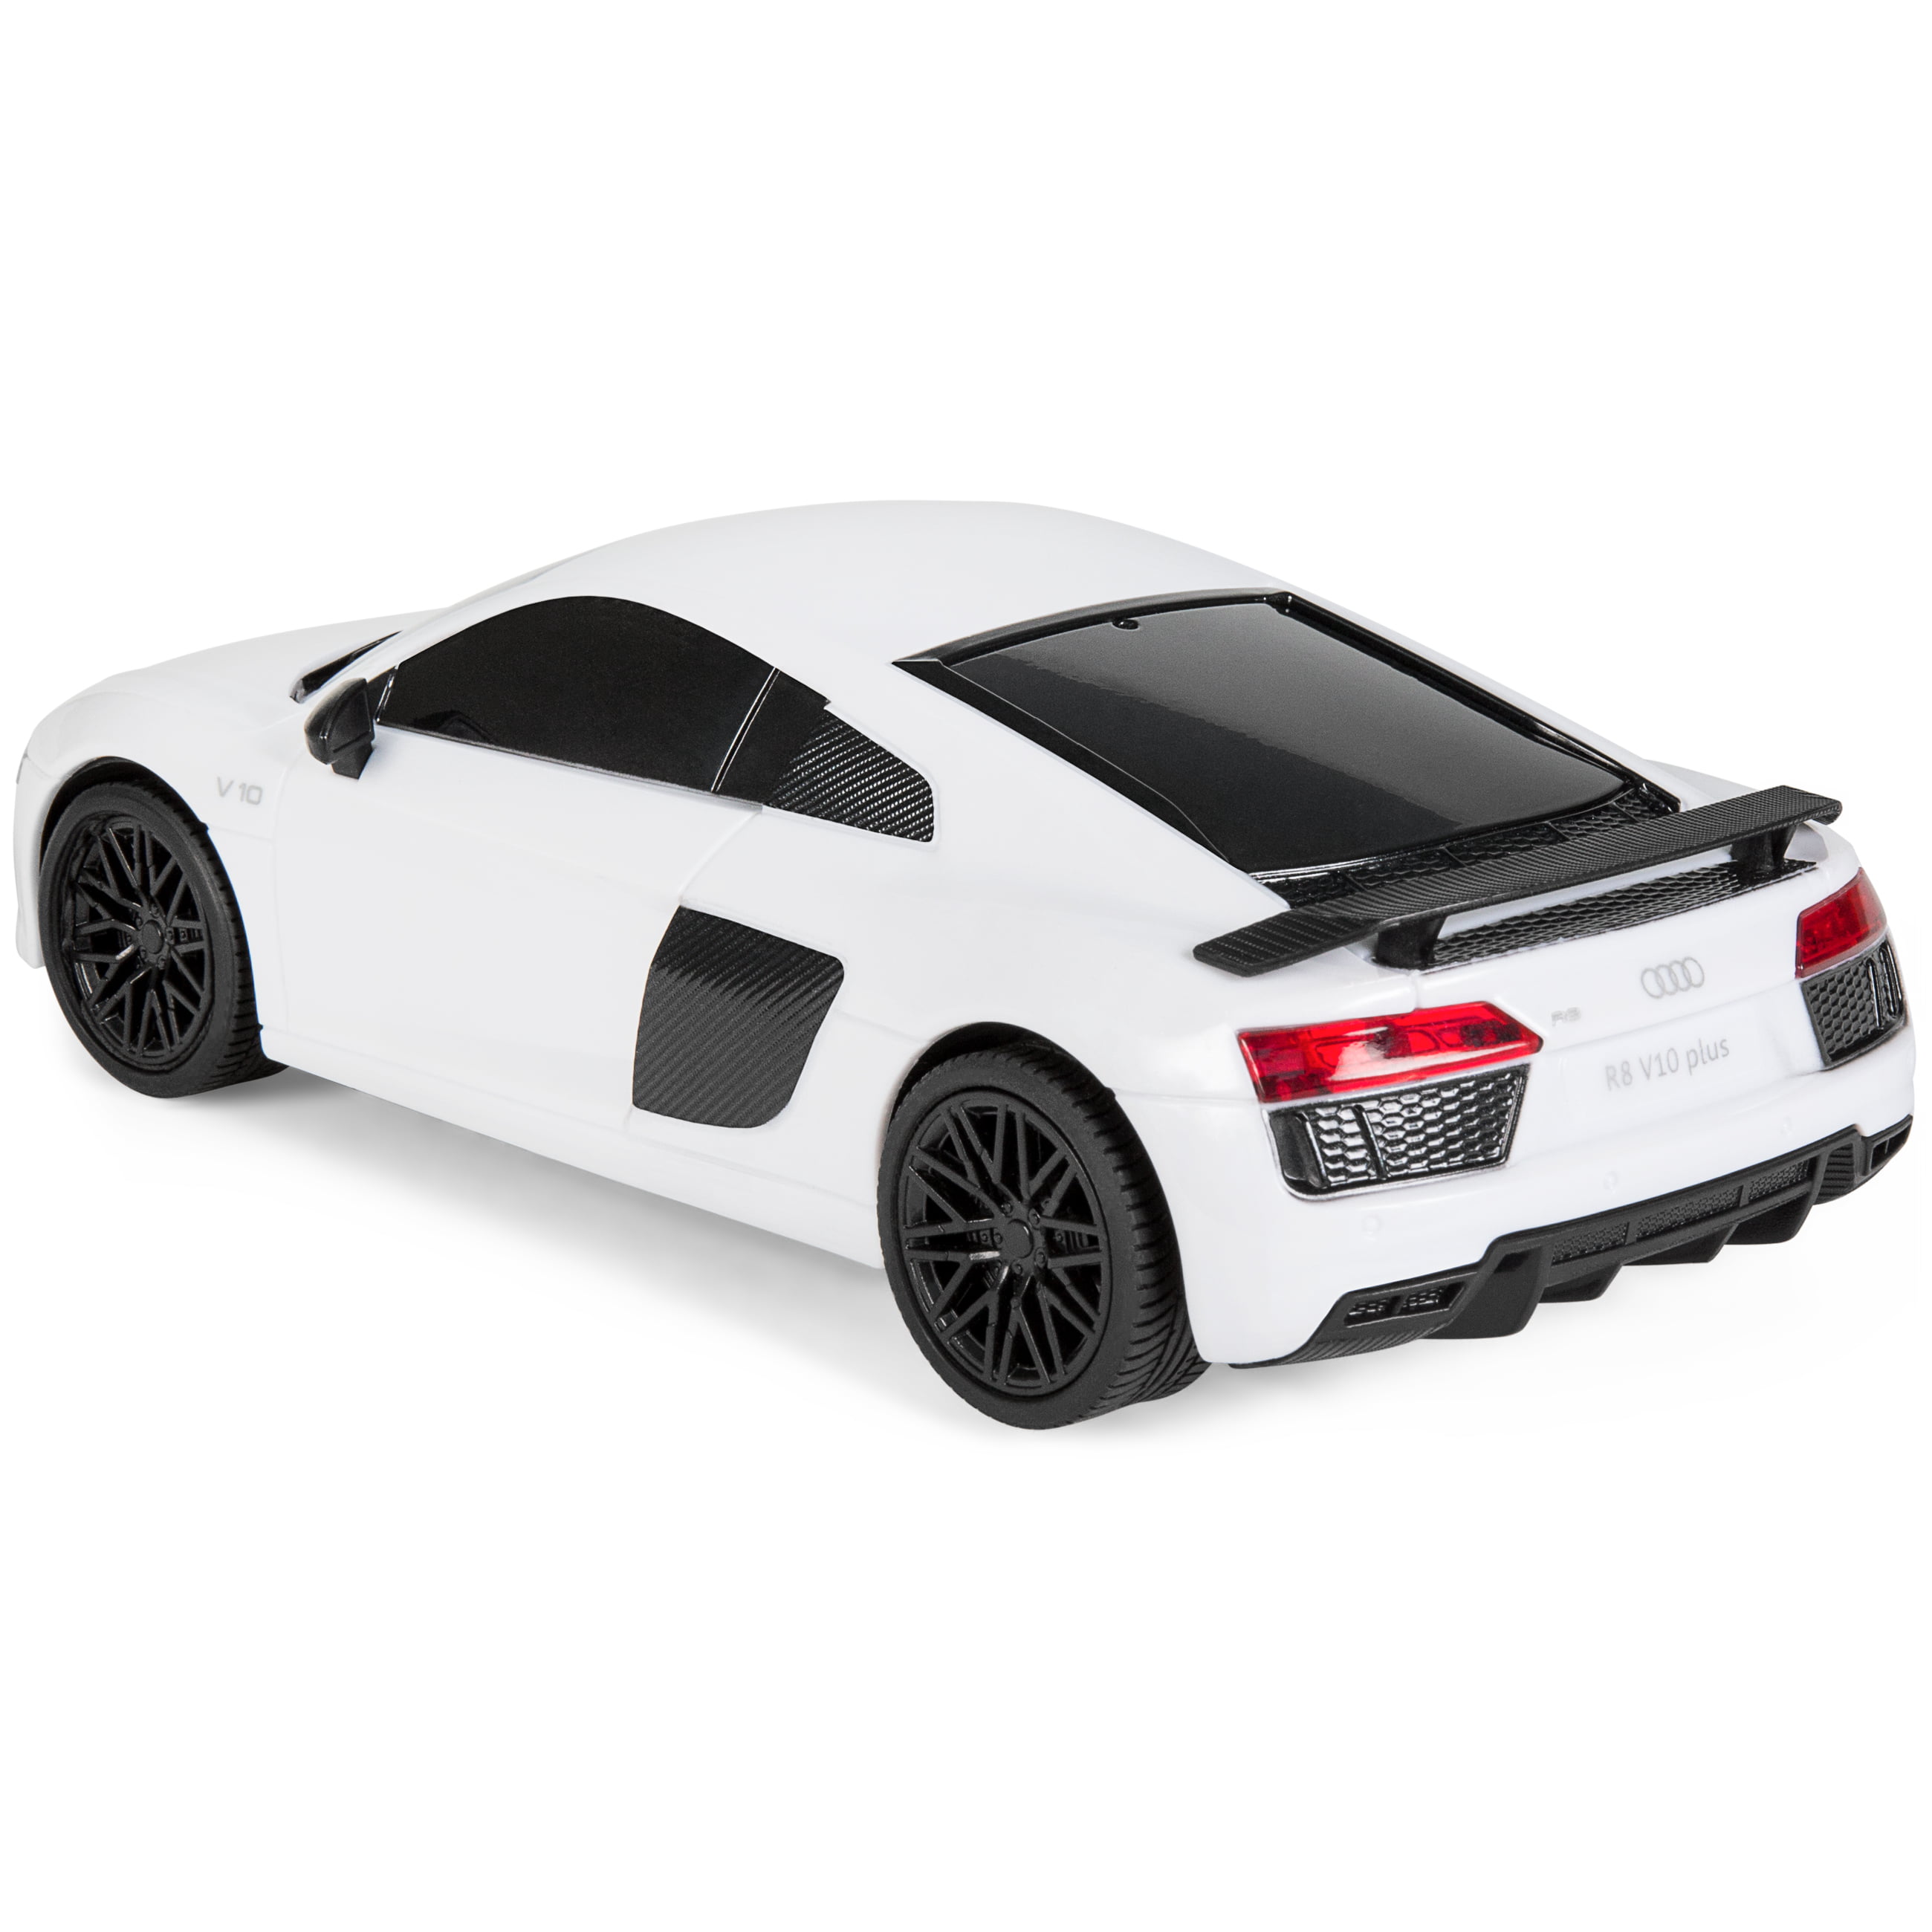 1:24 Remote Control Audi R8 V10 2009 Car Vehicle High Quality Toy KIds Childs 